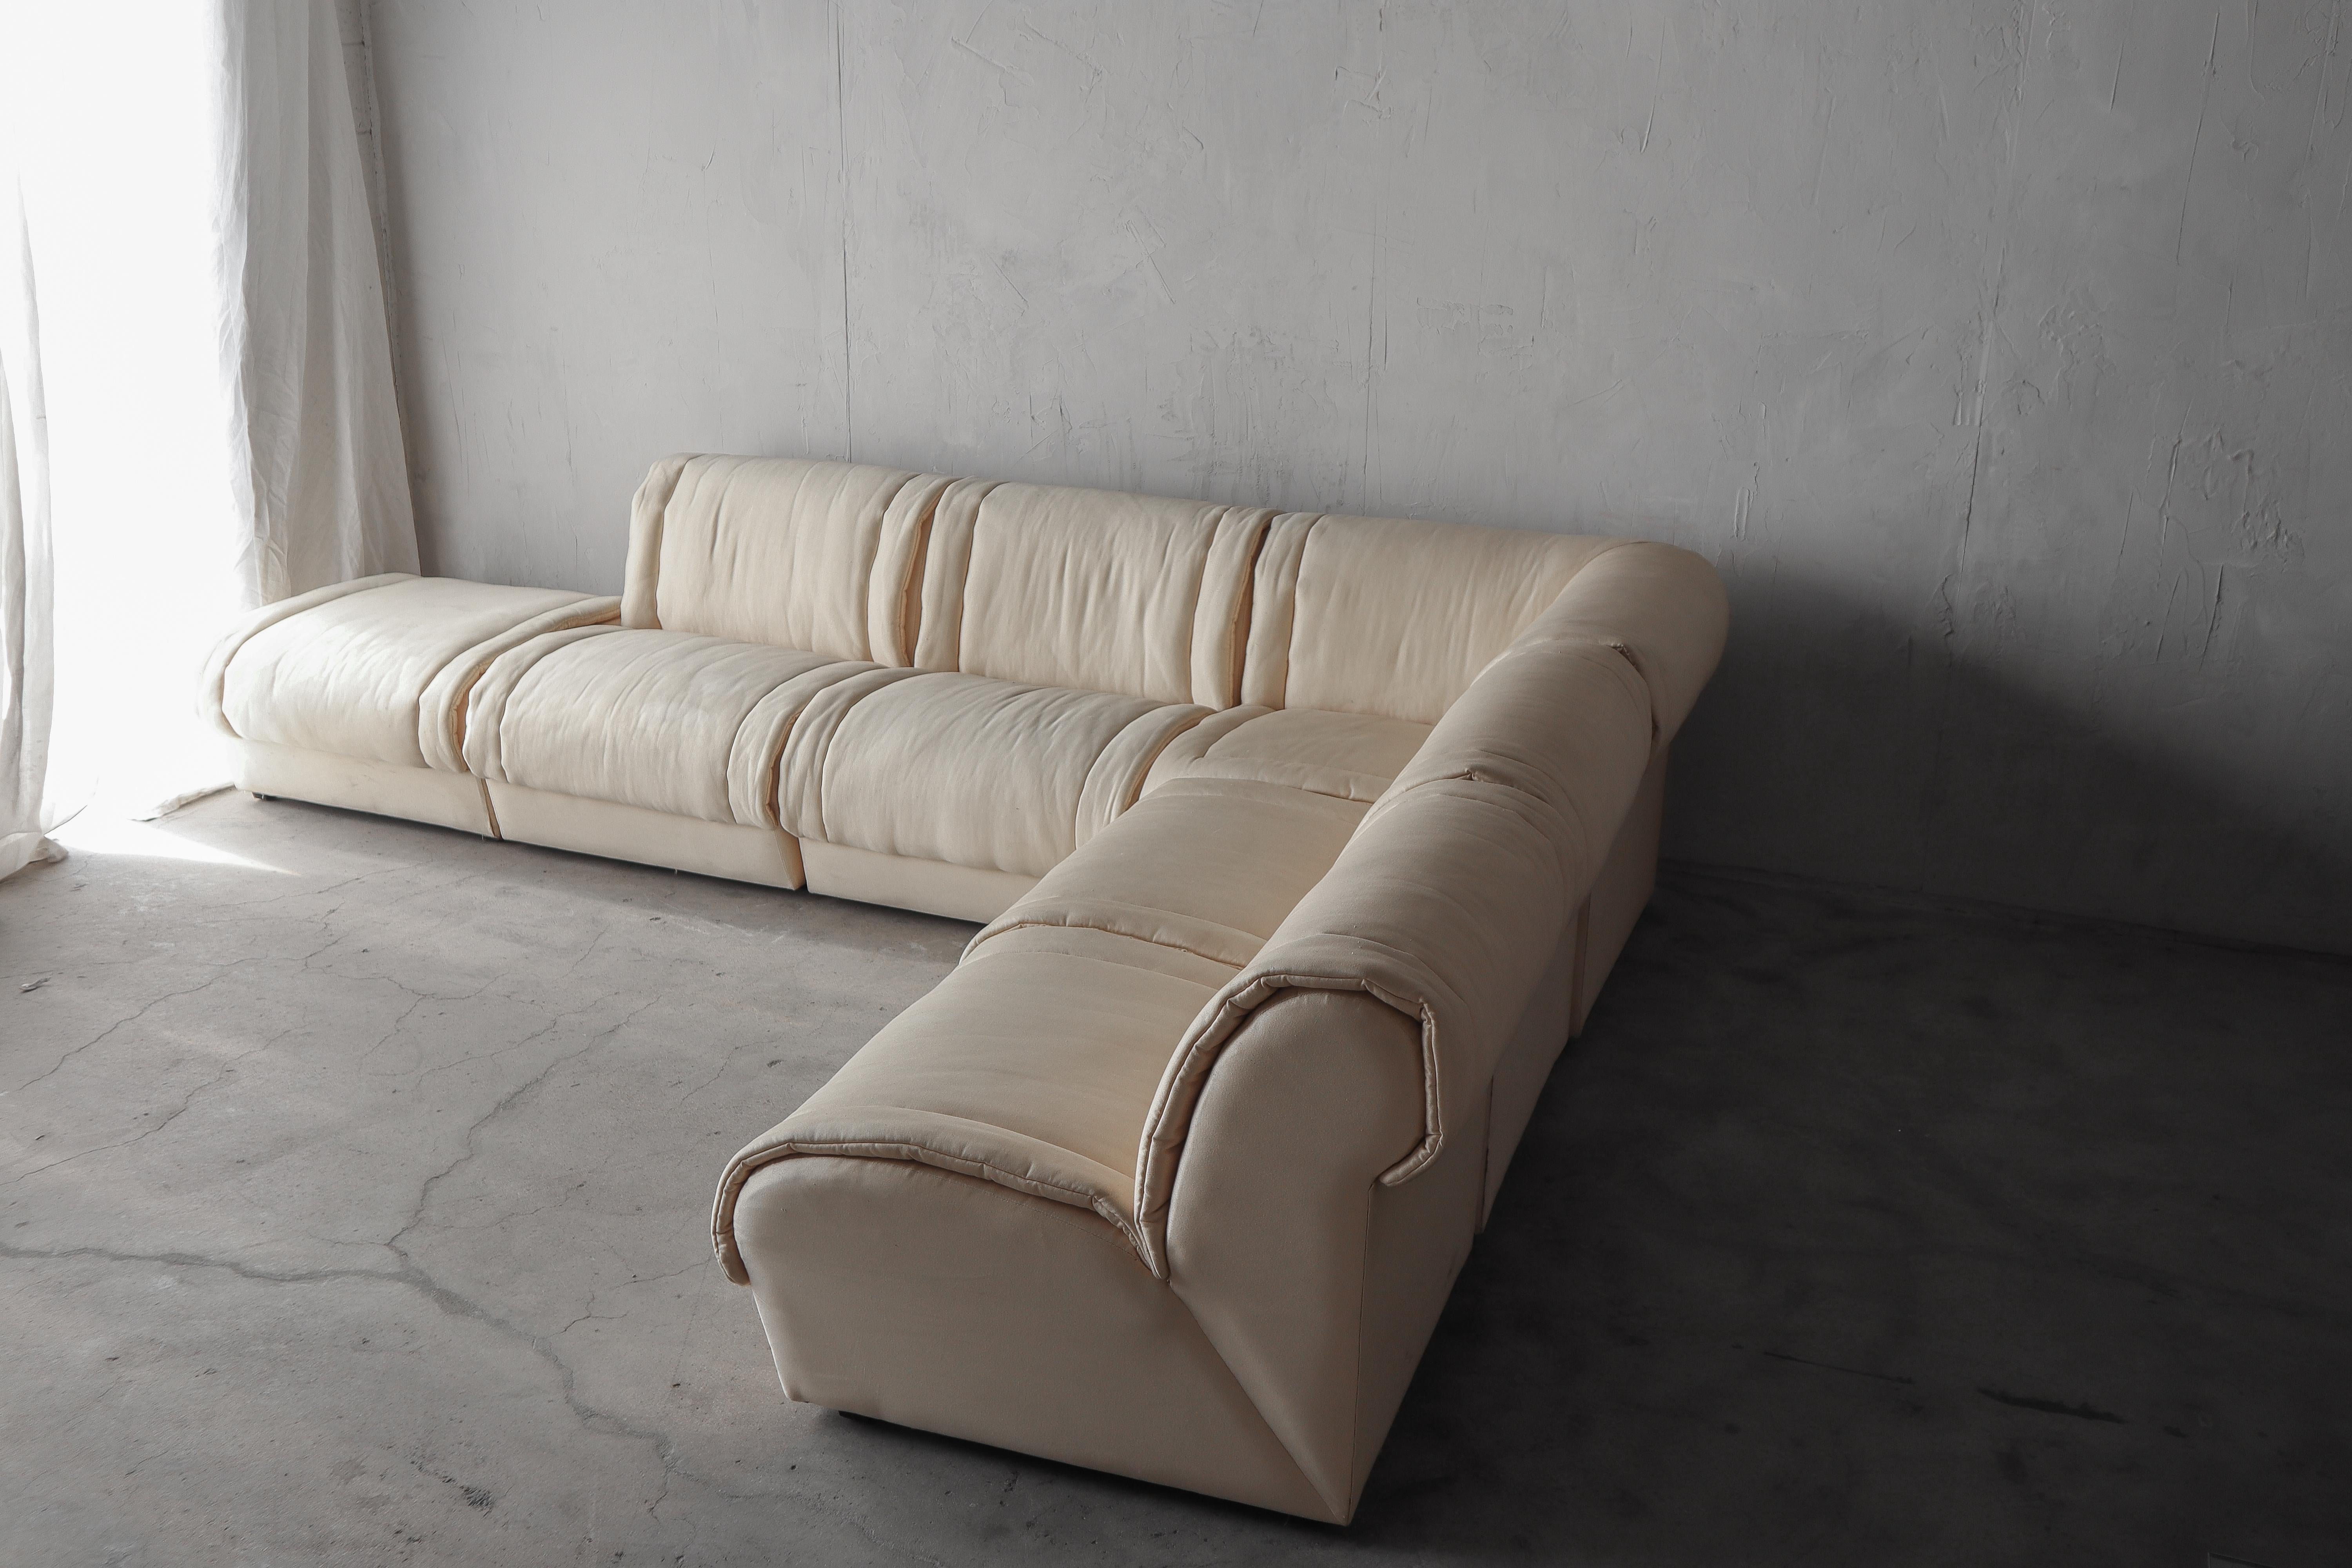 Great 6 piece Post Modern modular sectional sofa attributed to Rolf Benz. A gorgeous sofa that will make a massive statement.

Sofa is being sold as found, reupholstery is needed but the frame is solid. We have priced it fairly, leaving room to